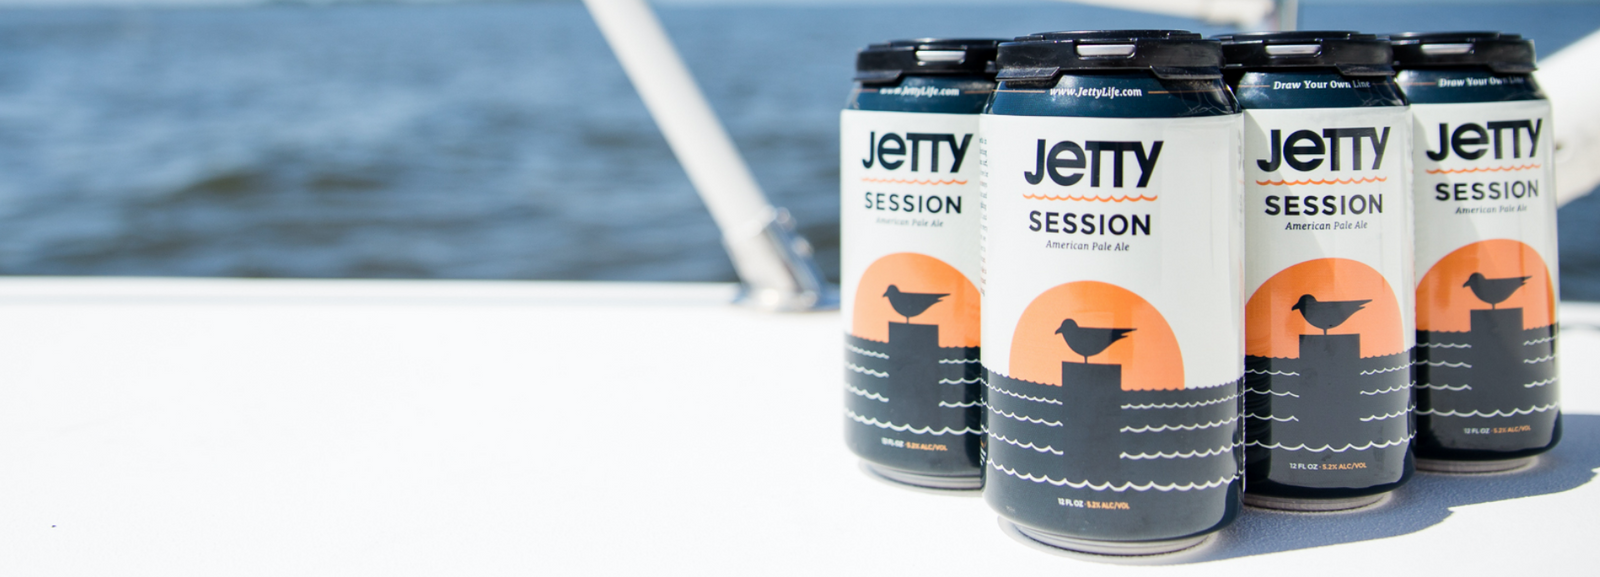 ‎Jetty Brewing Co.